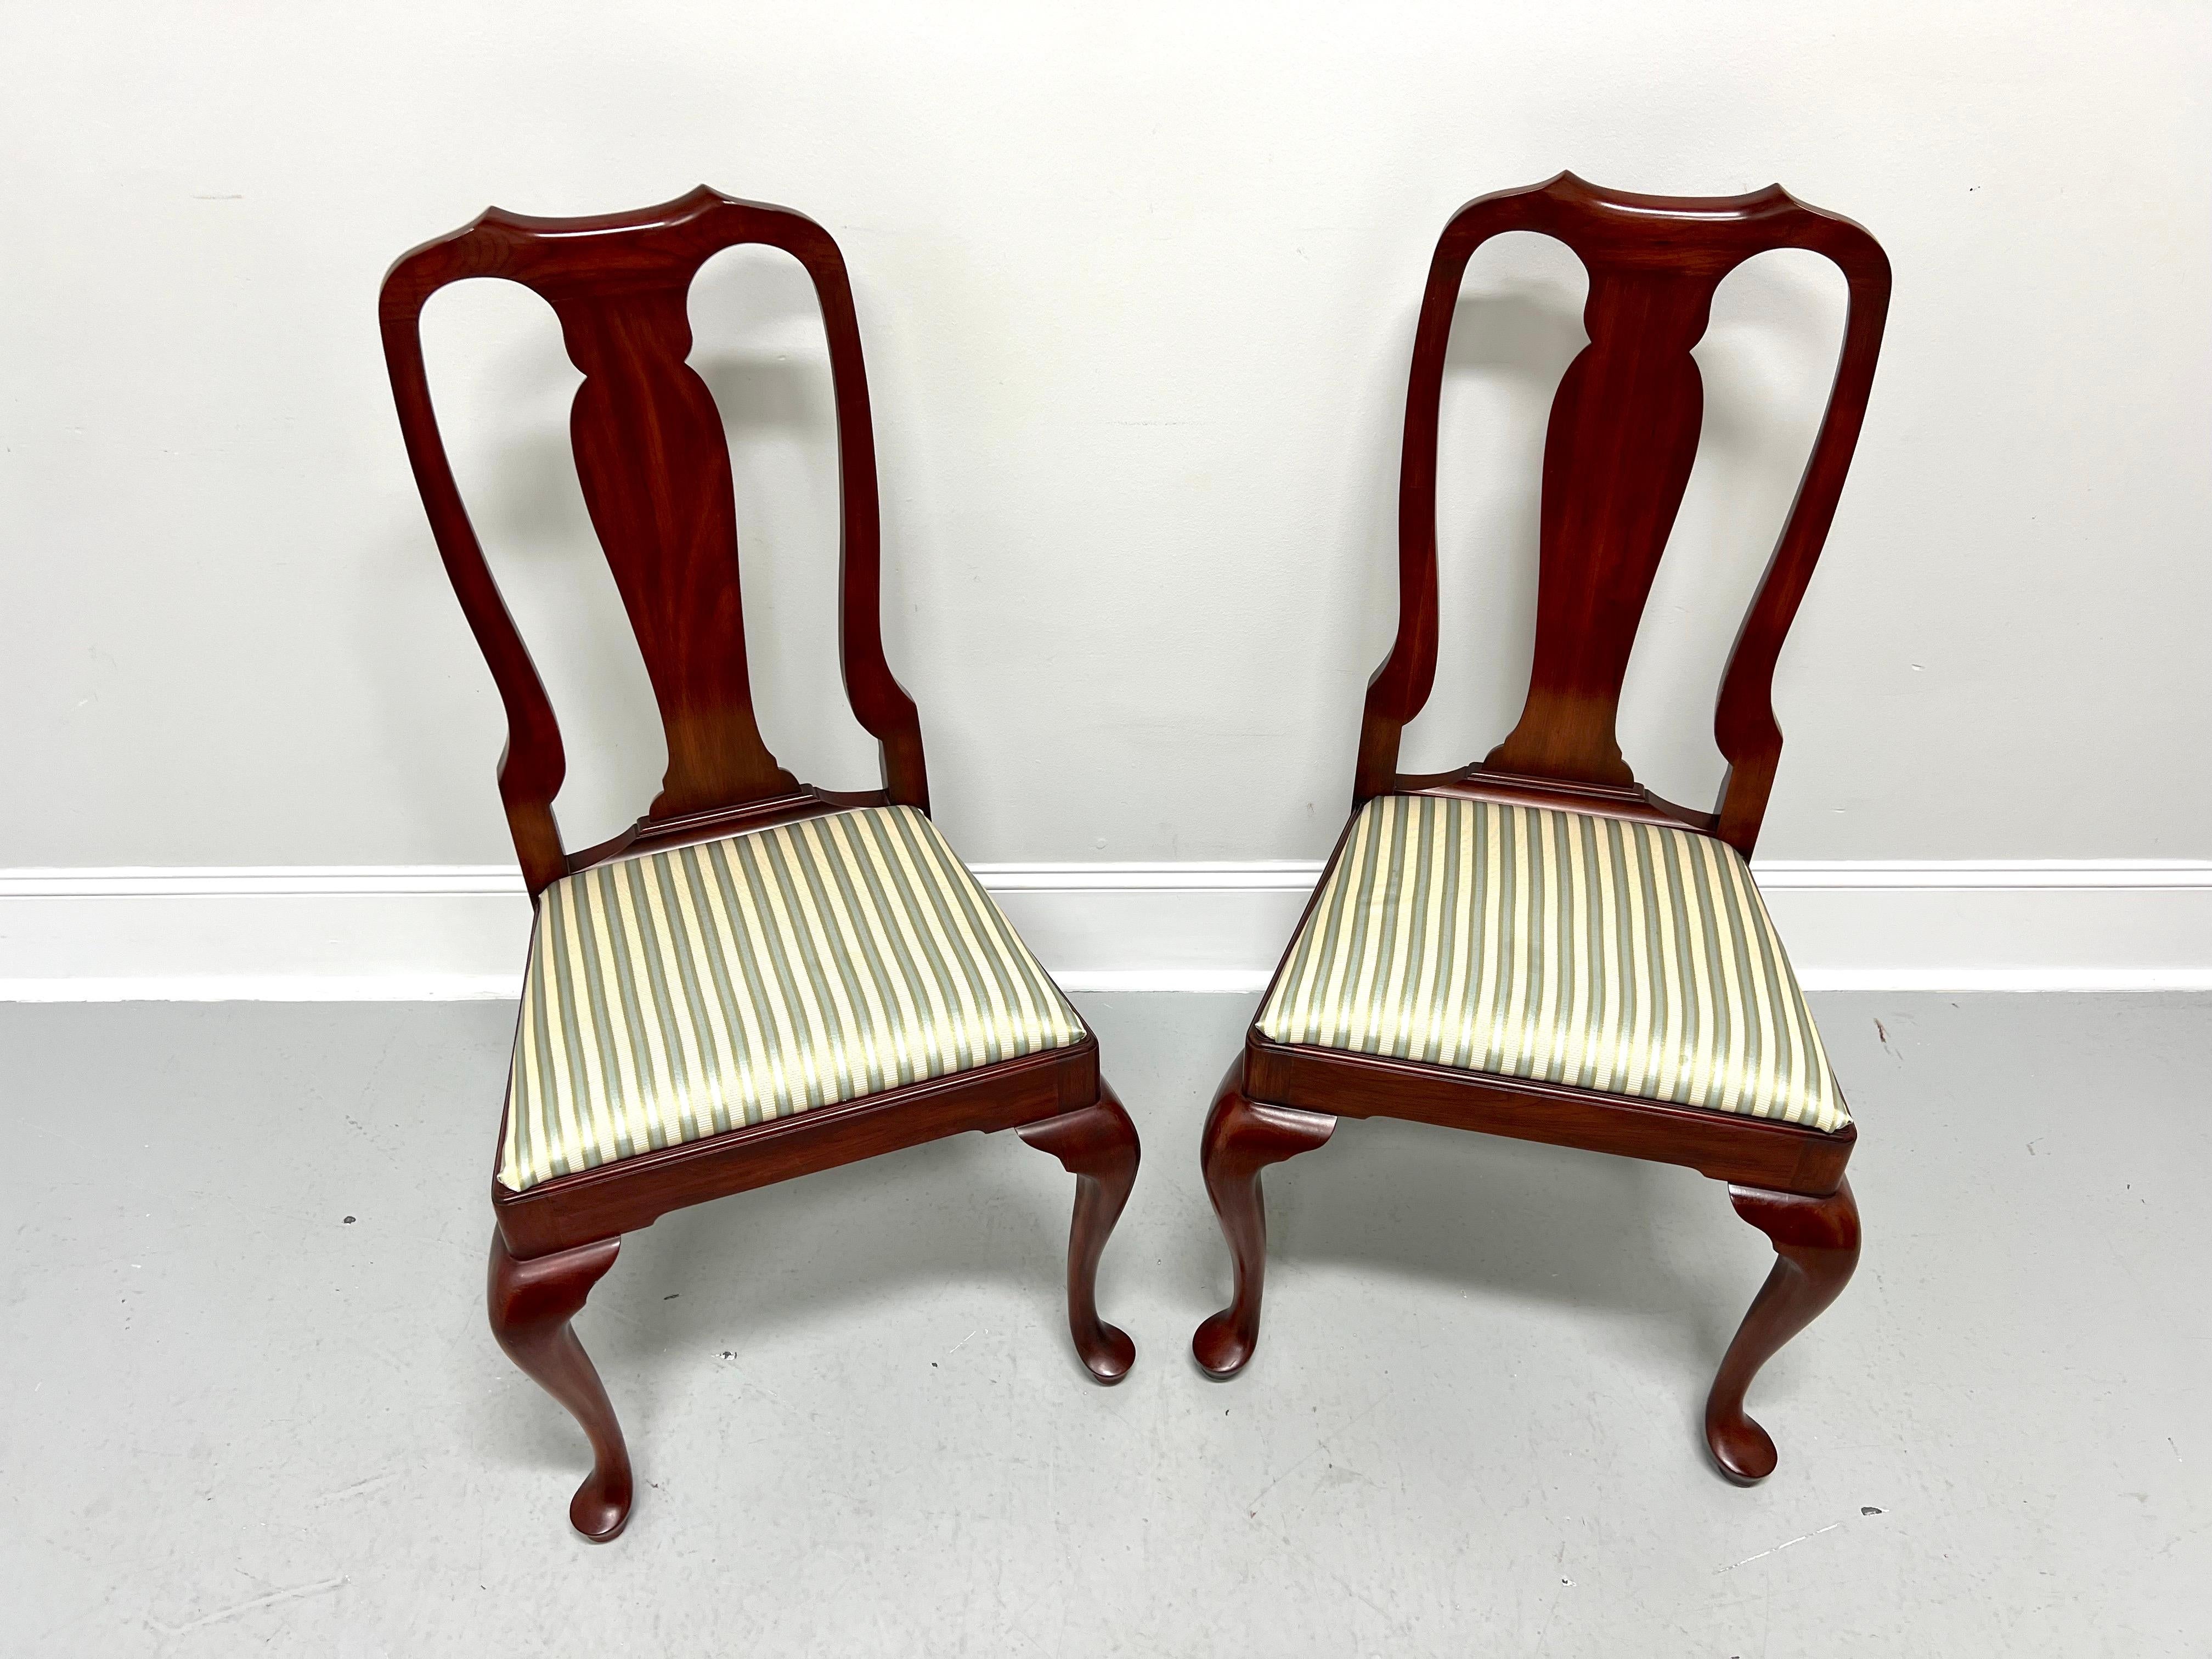 A pair of Queen Anne style dining side chairs by Henkel Harris, of Winchester, Virginia, USA. Solid wild black cherry wood, carved center backrest, upholstered seat in a multi-color stripe patterned fabric, solid apron, cabriole legs, and pad feet.